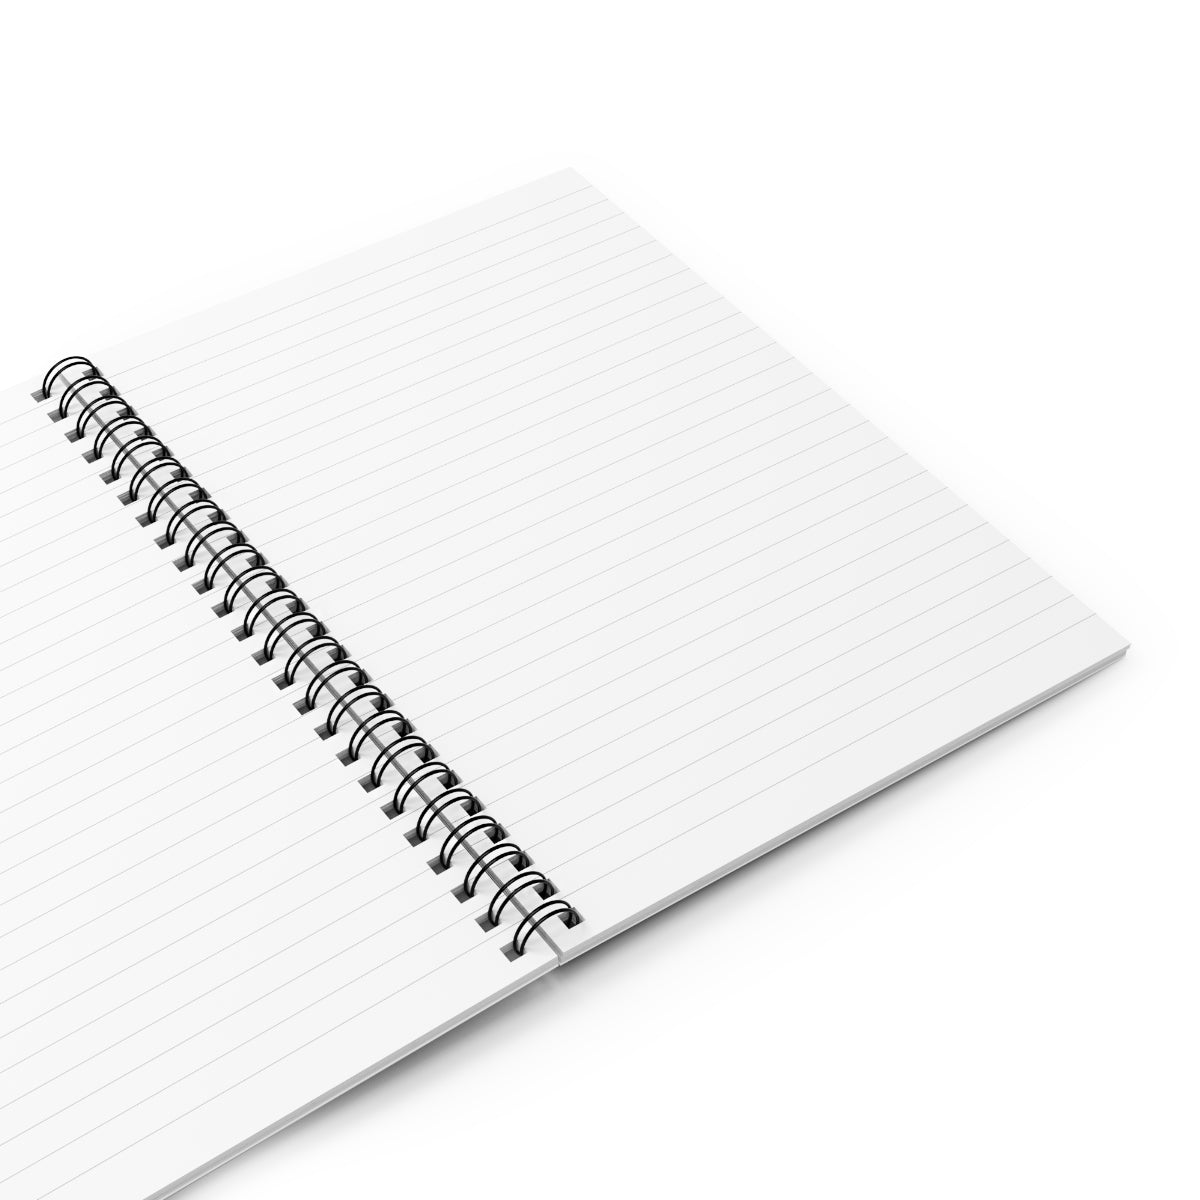 Blue Bows Notebook - BRYKNOLO LLC Paper products